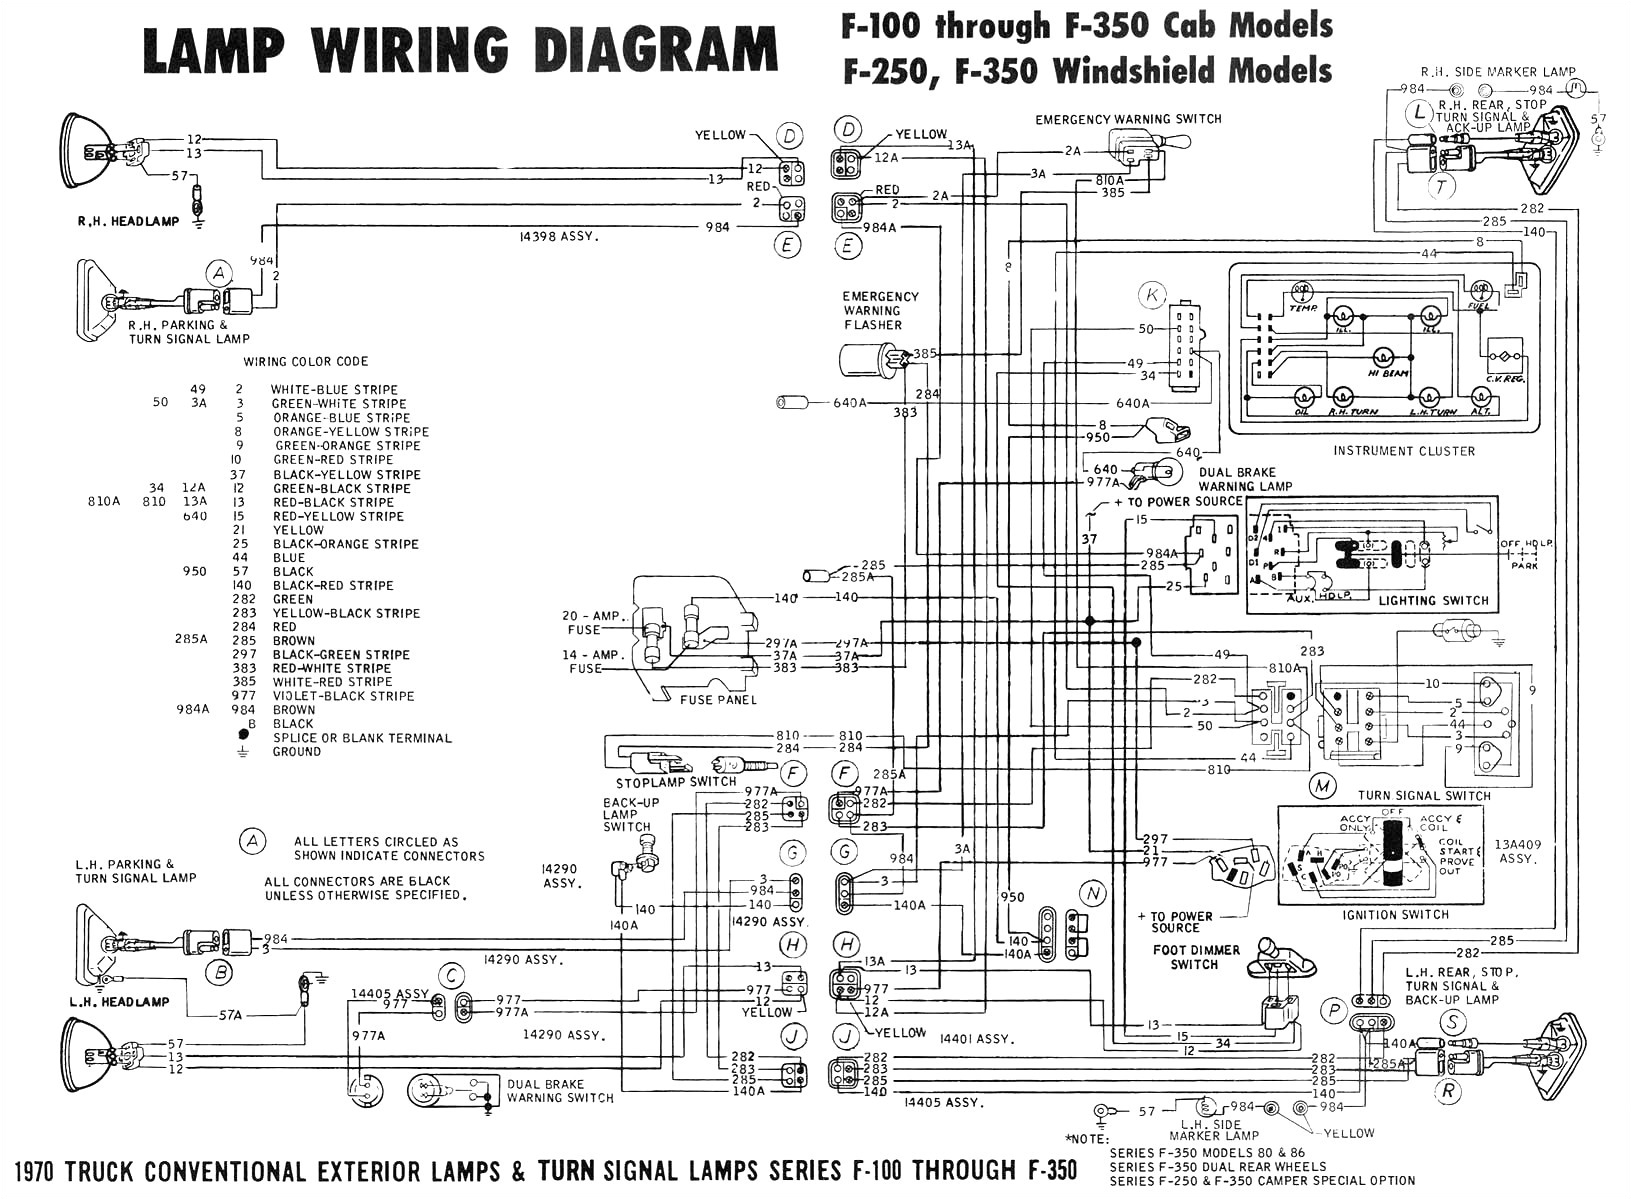 wiring diagram for 2006 f250 wiring diagram files 2006 f250 4x4 wiring diagram 06 f250 wiring diagram